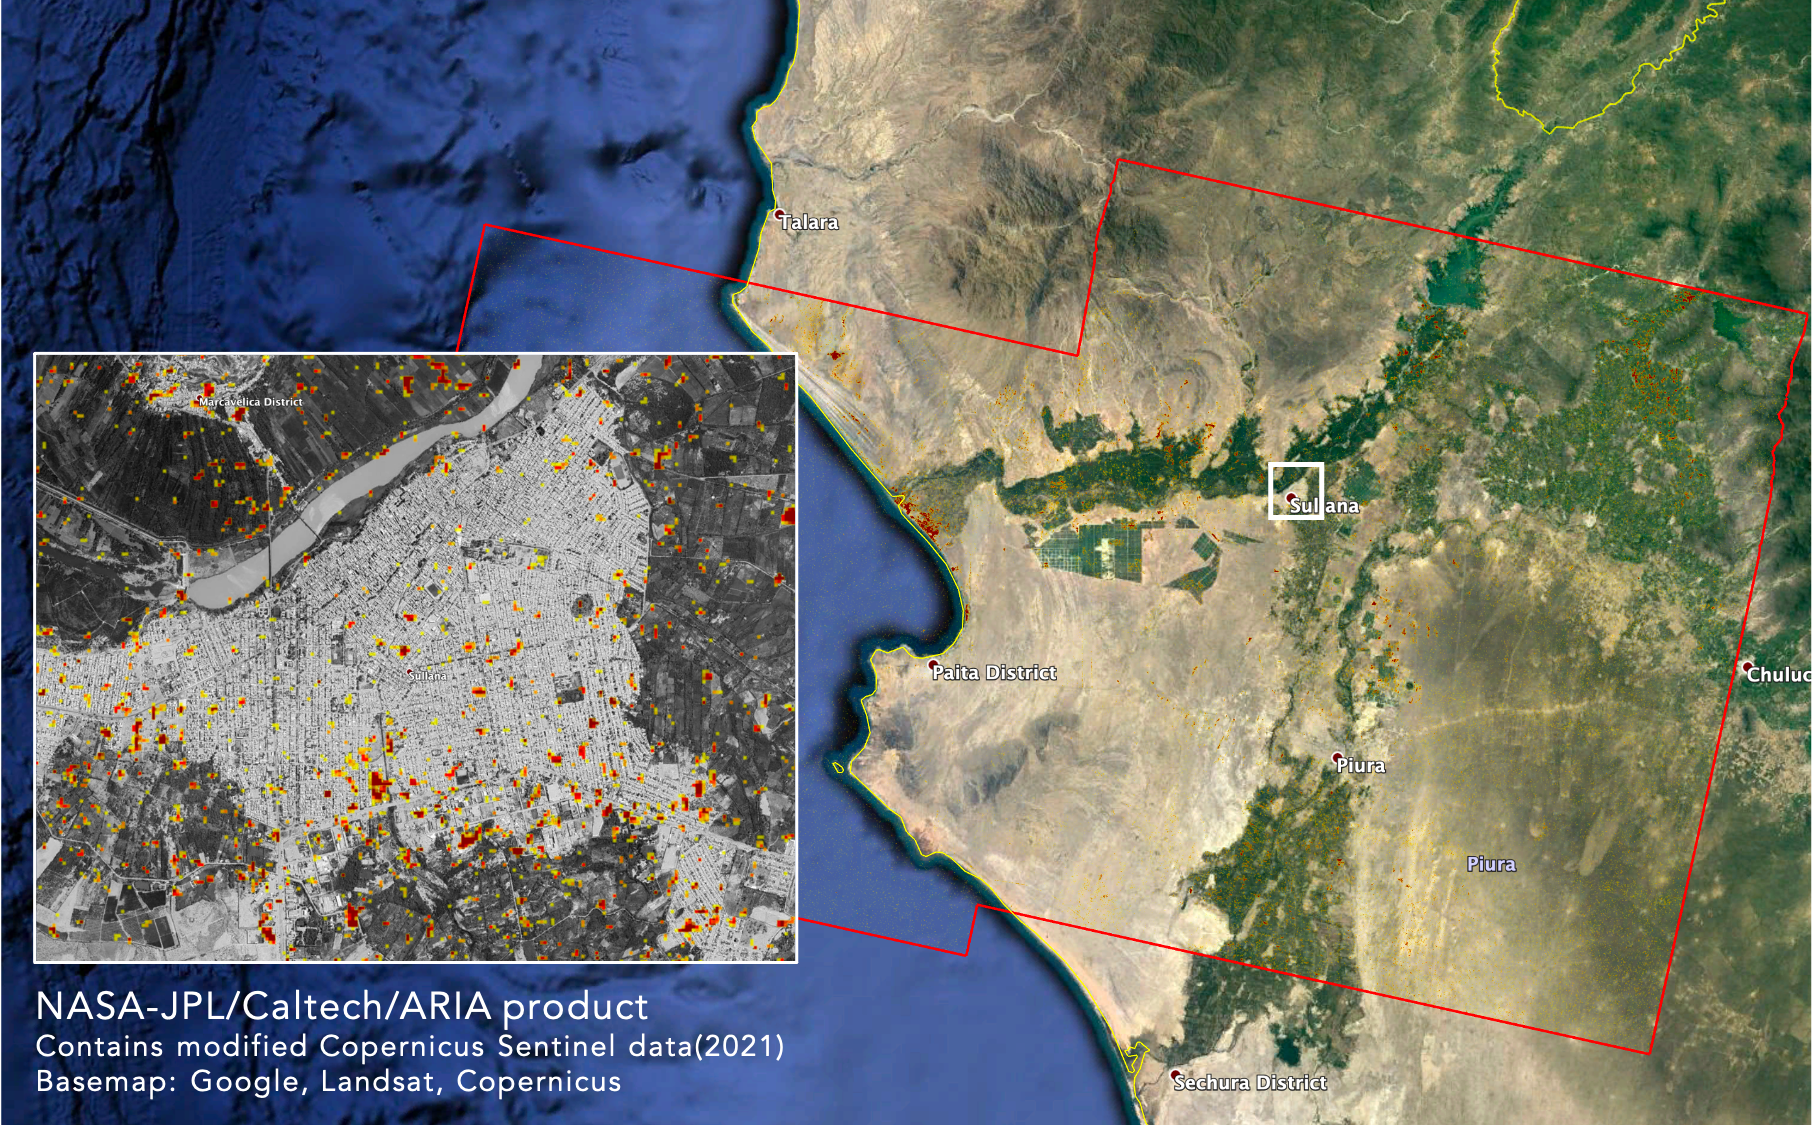 Damage Proxy Map (DPM) from ARIA team at NASA JPL depicting areas that are likely damaged by the recent Mw 6.2 July 30, 2021 earthquake beneath the ESE of Sullana, Peru. 